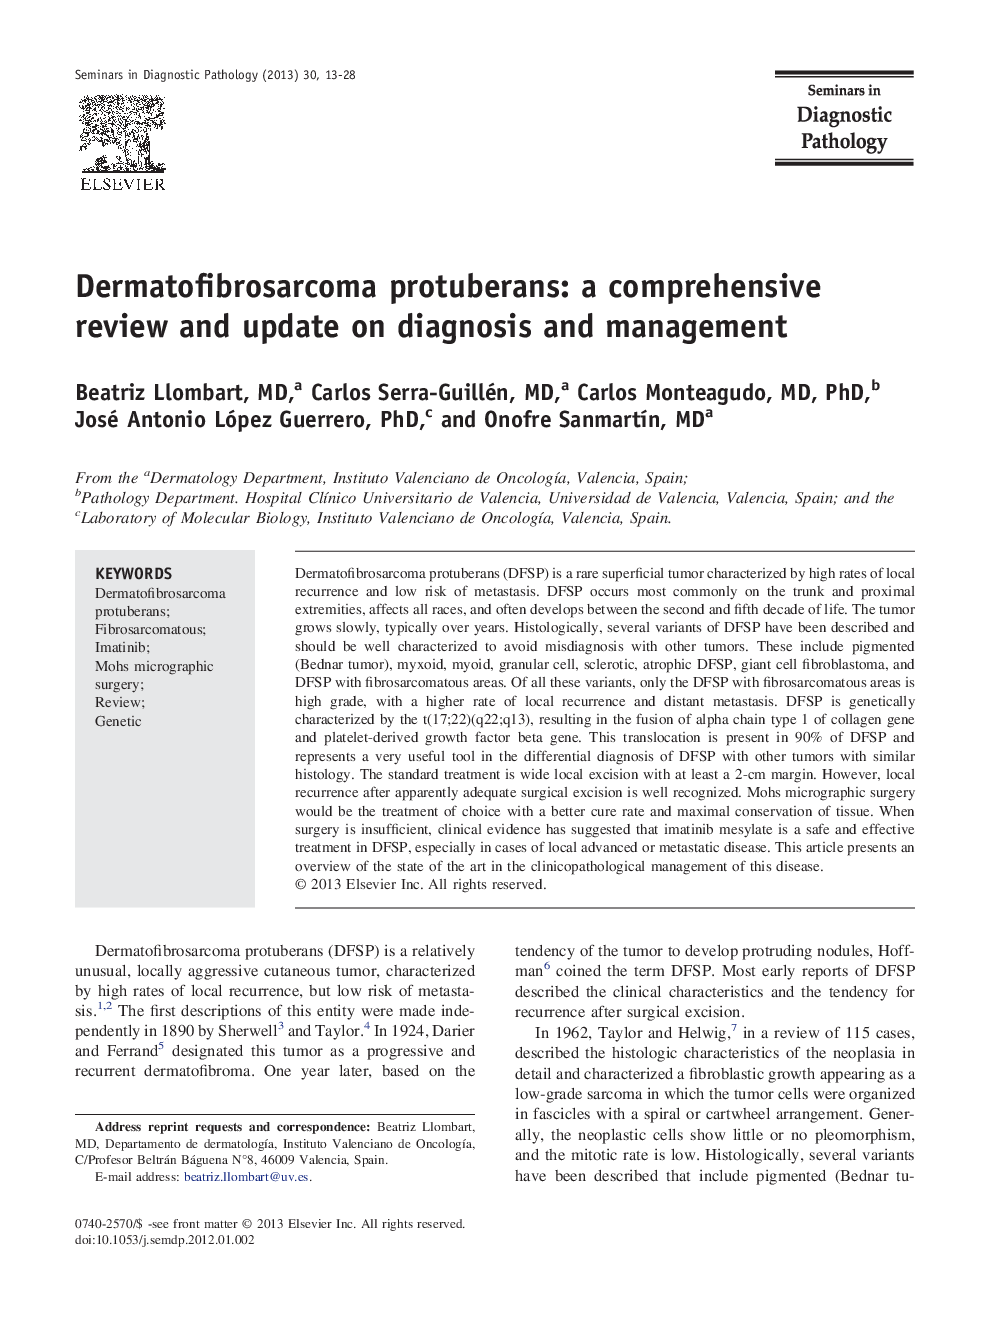 Dermatofibrosarcoma protuberans: a comprehensive review and update on diagnosis and management